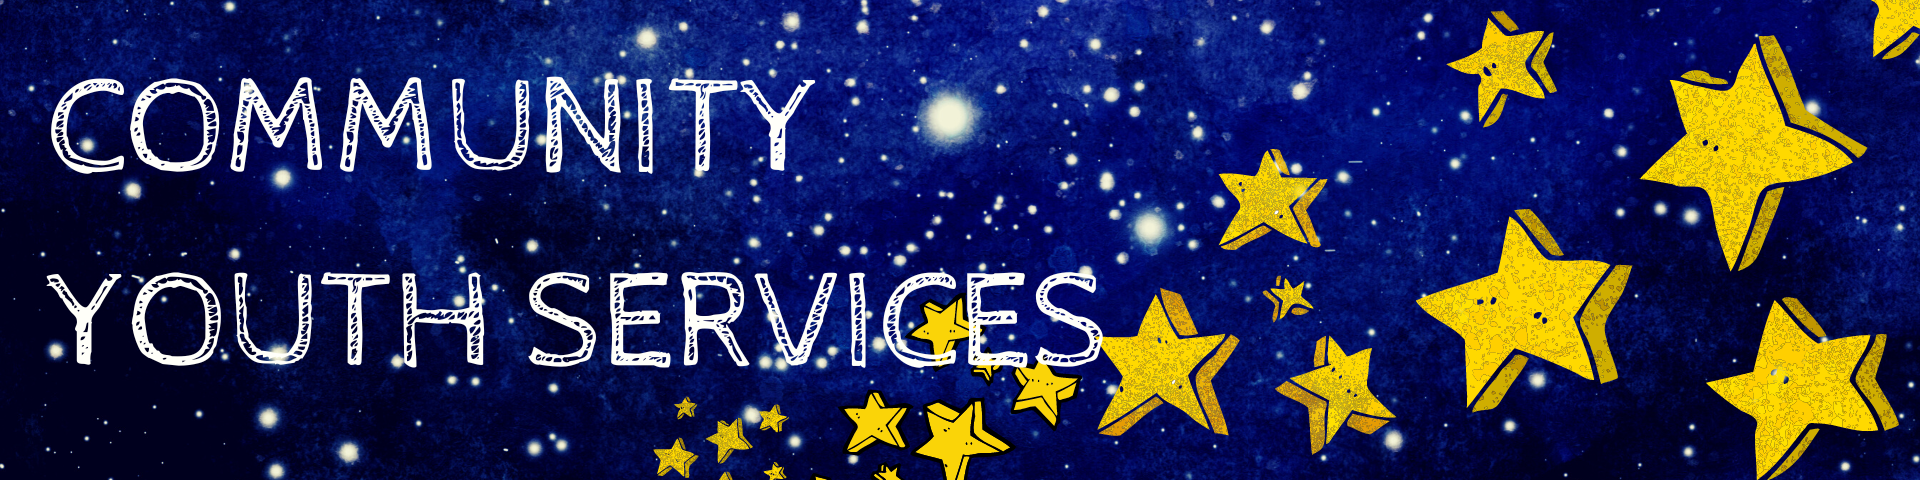 Community Youth Services banner with stars